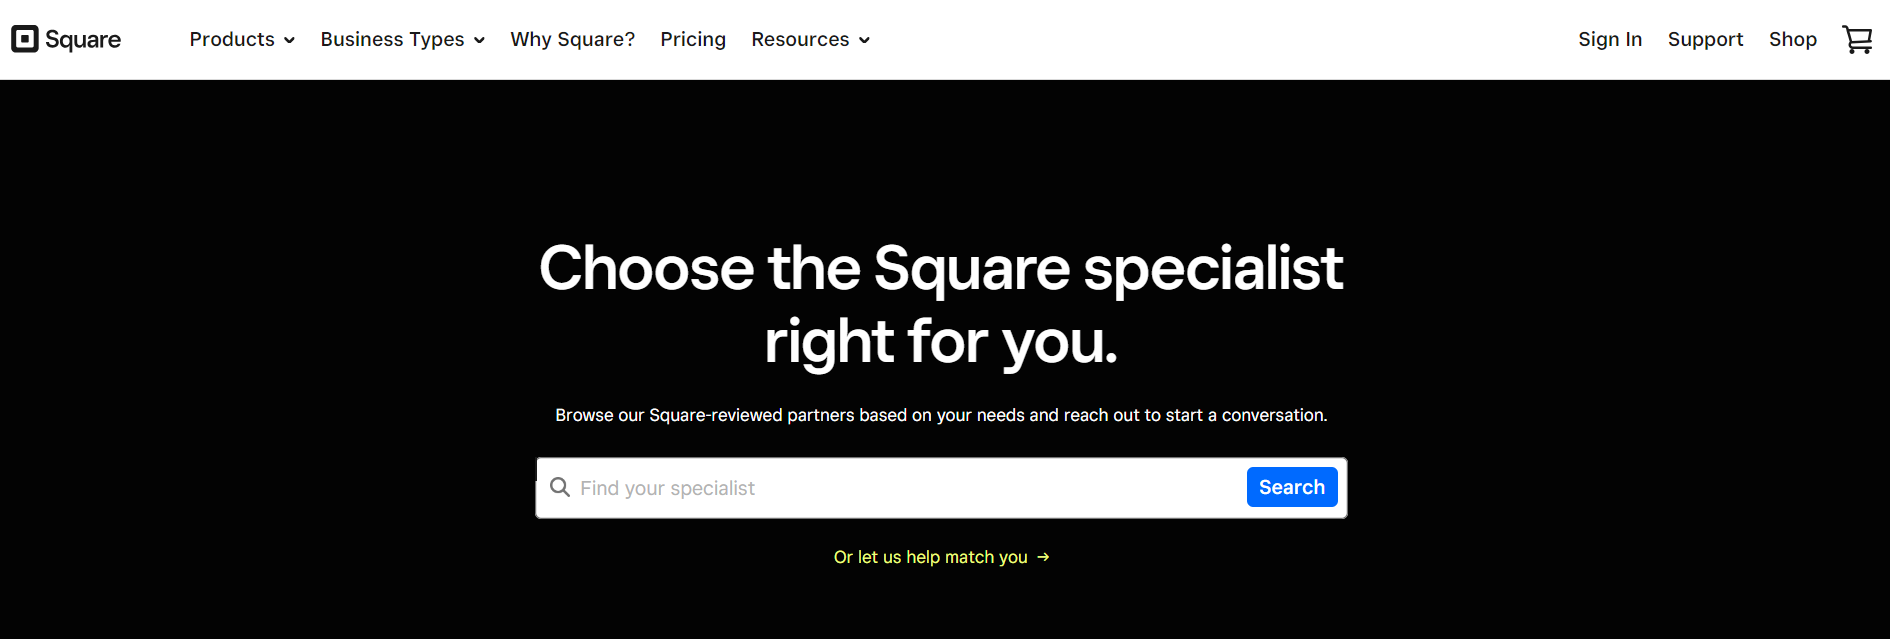 square specialists can help with your square migration